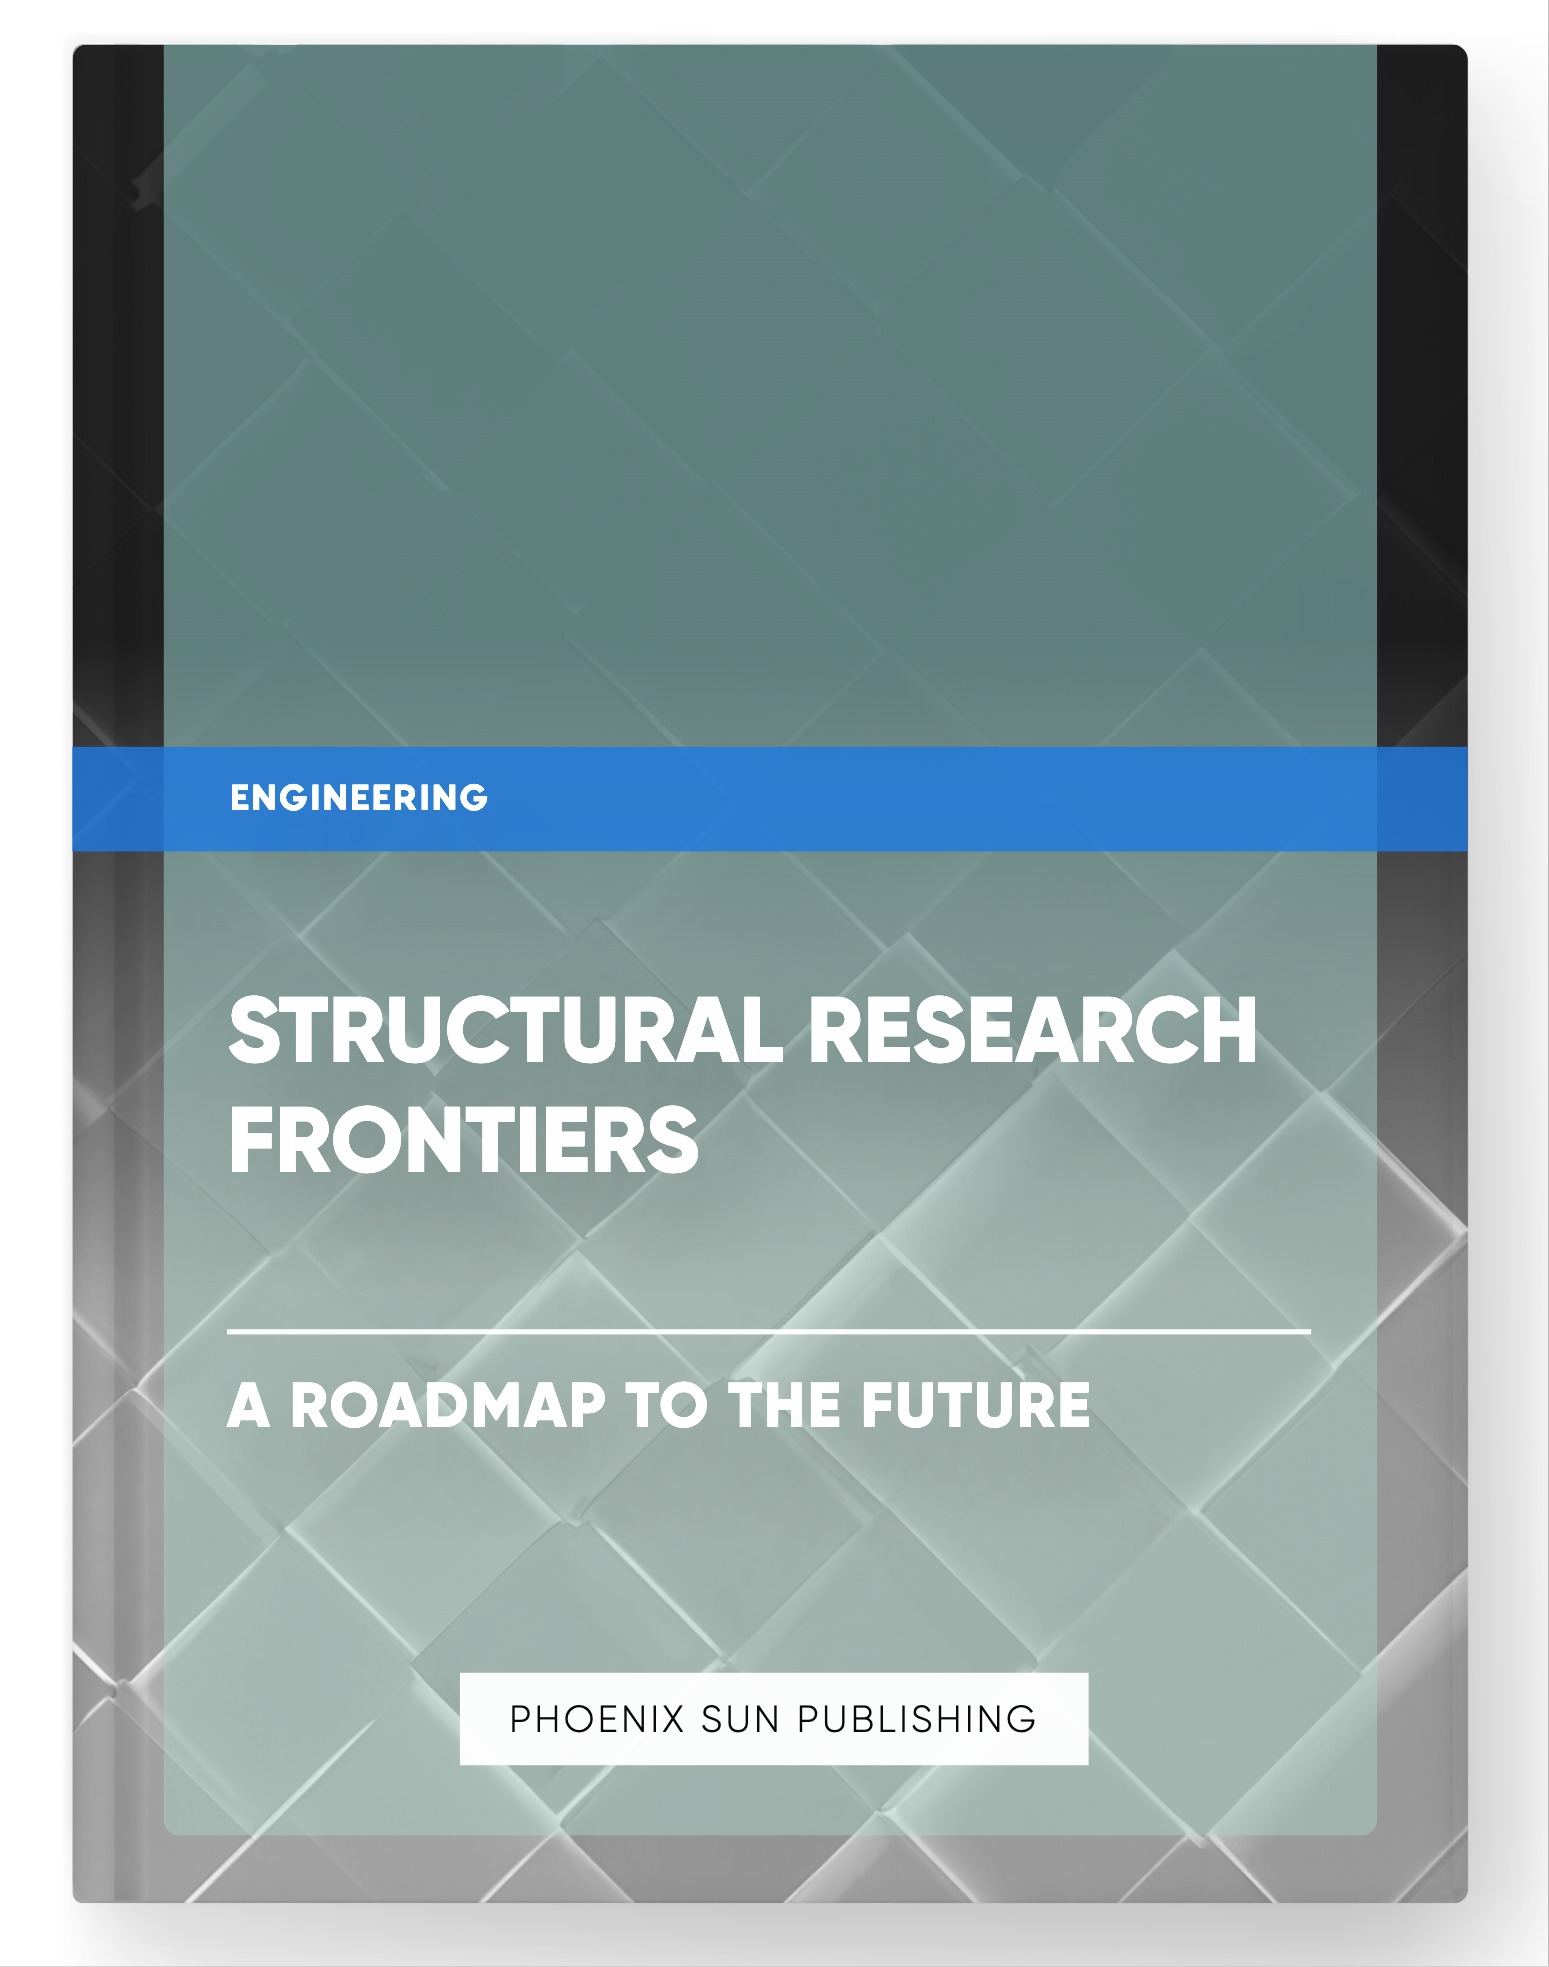 Structural Research Frontiers – A Roadmap to the Future